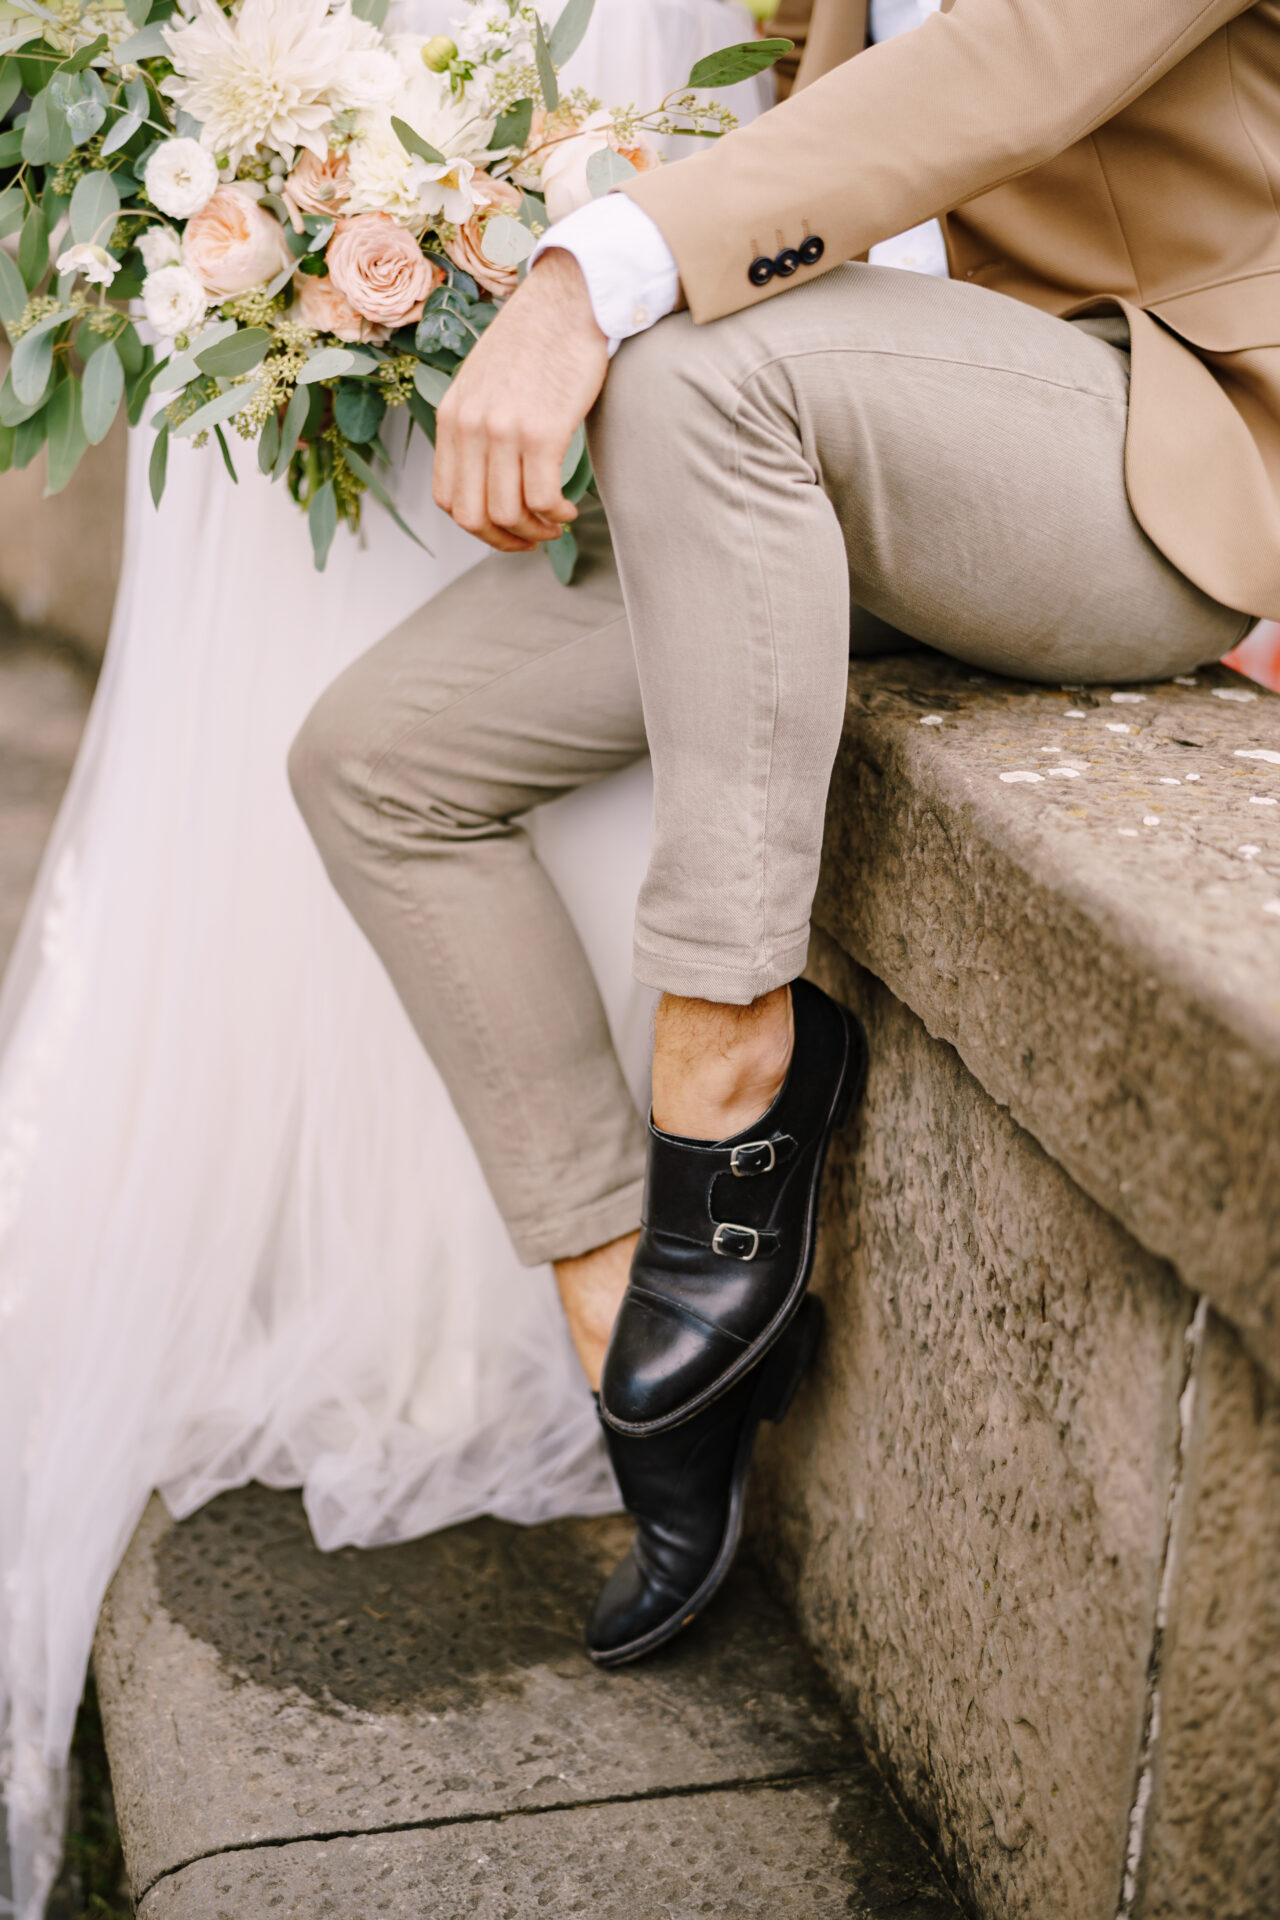 Close-up of the legs of the groom in light short pants and black leather shoes, the bride in a white dress with a bouquet in her hand